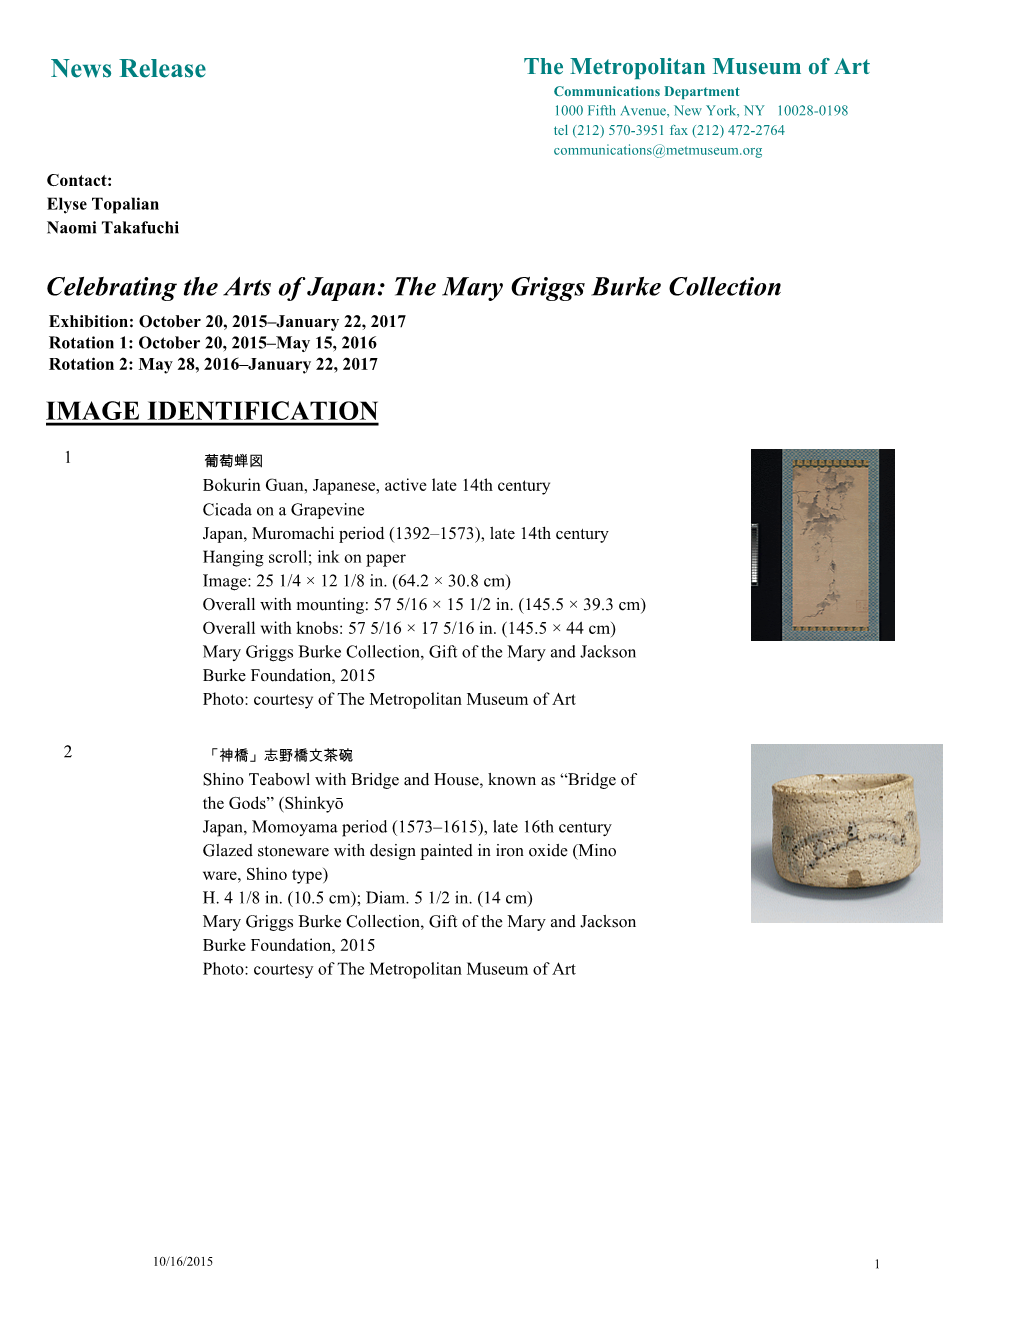 The Mary Griggs Burke Collection IMAGE IDENTIFICATION